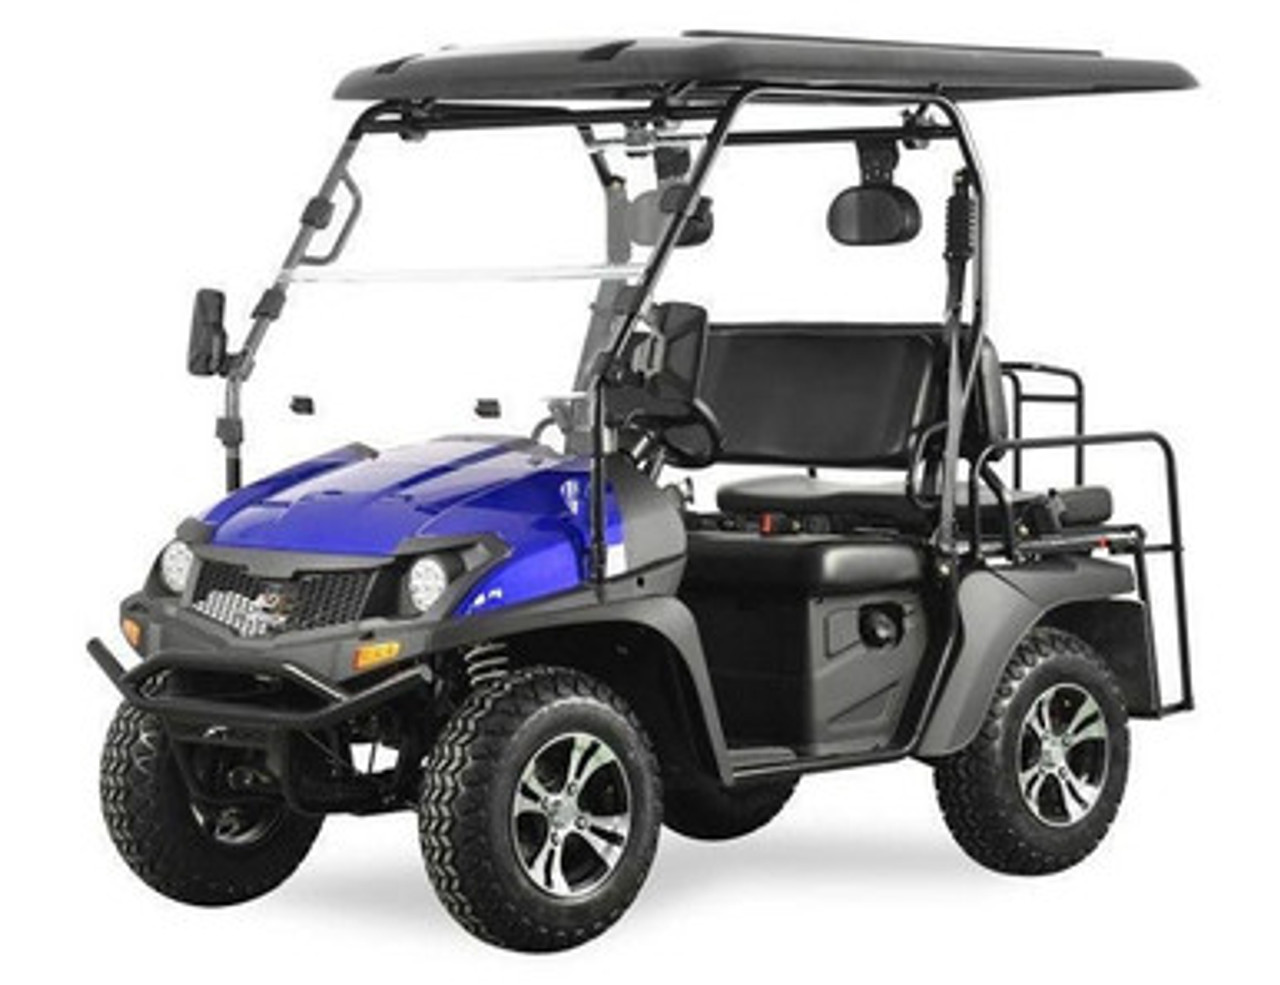 Trailmaster Taurus 200GX UTV, 4-Stroke, Single Cylinder, Air and Oil Cooled - Blue-Front-View